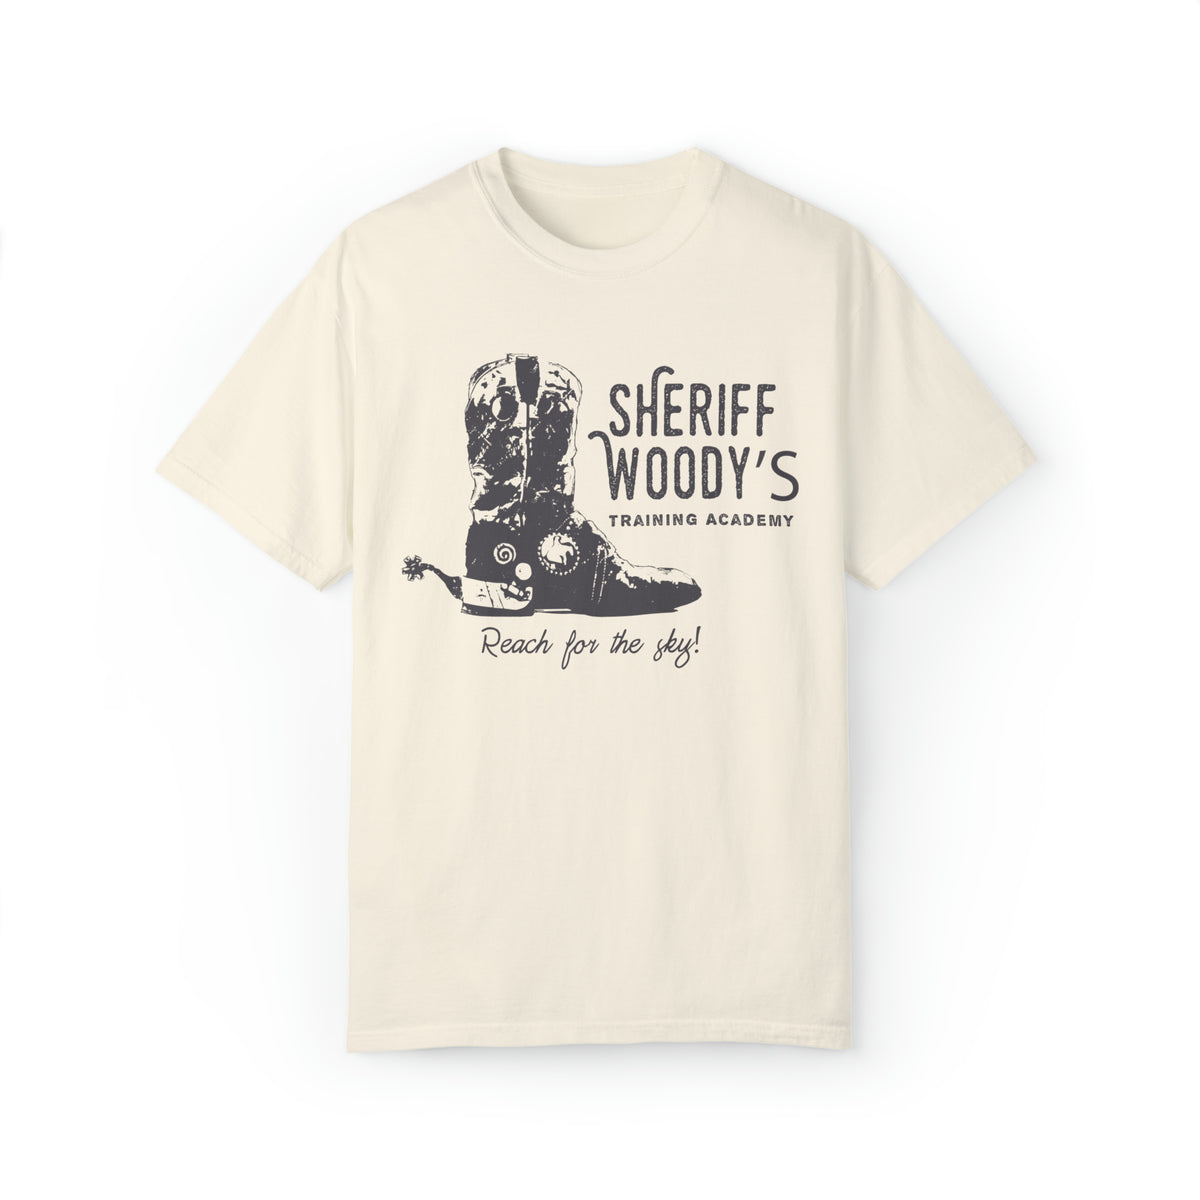 Sheriff Woody’s Training Academy Comfort Colors Unisex Garment-Dyed T-shirt